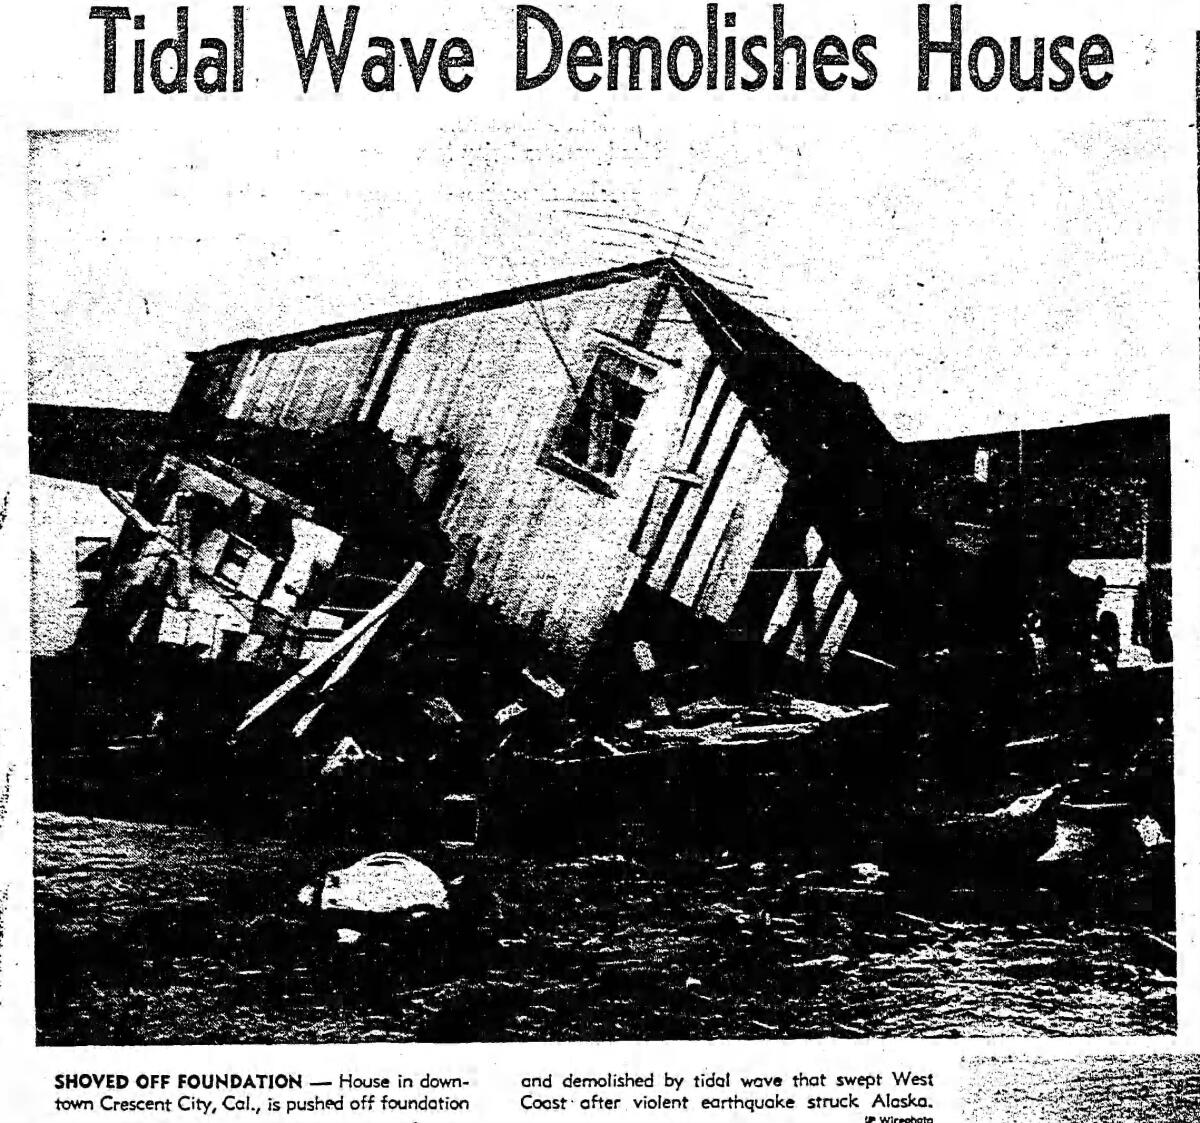 A newspaper clipping of a wrecked house. The headline reads "Tidal Wave Demolishes House."